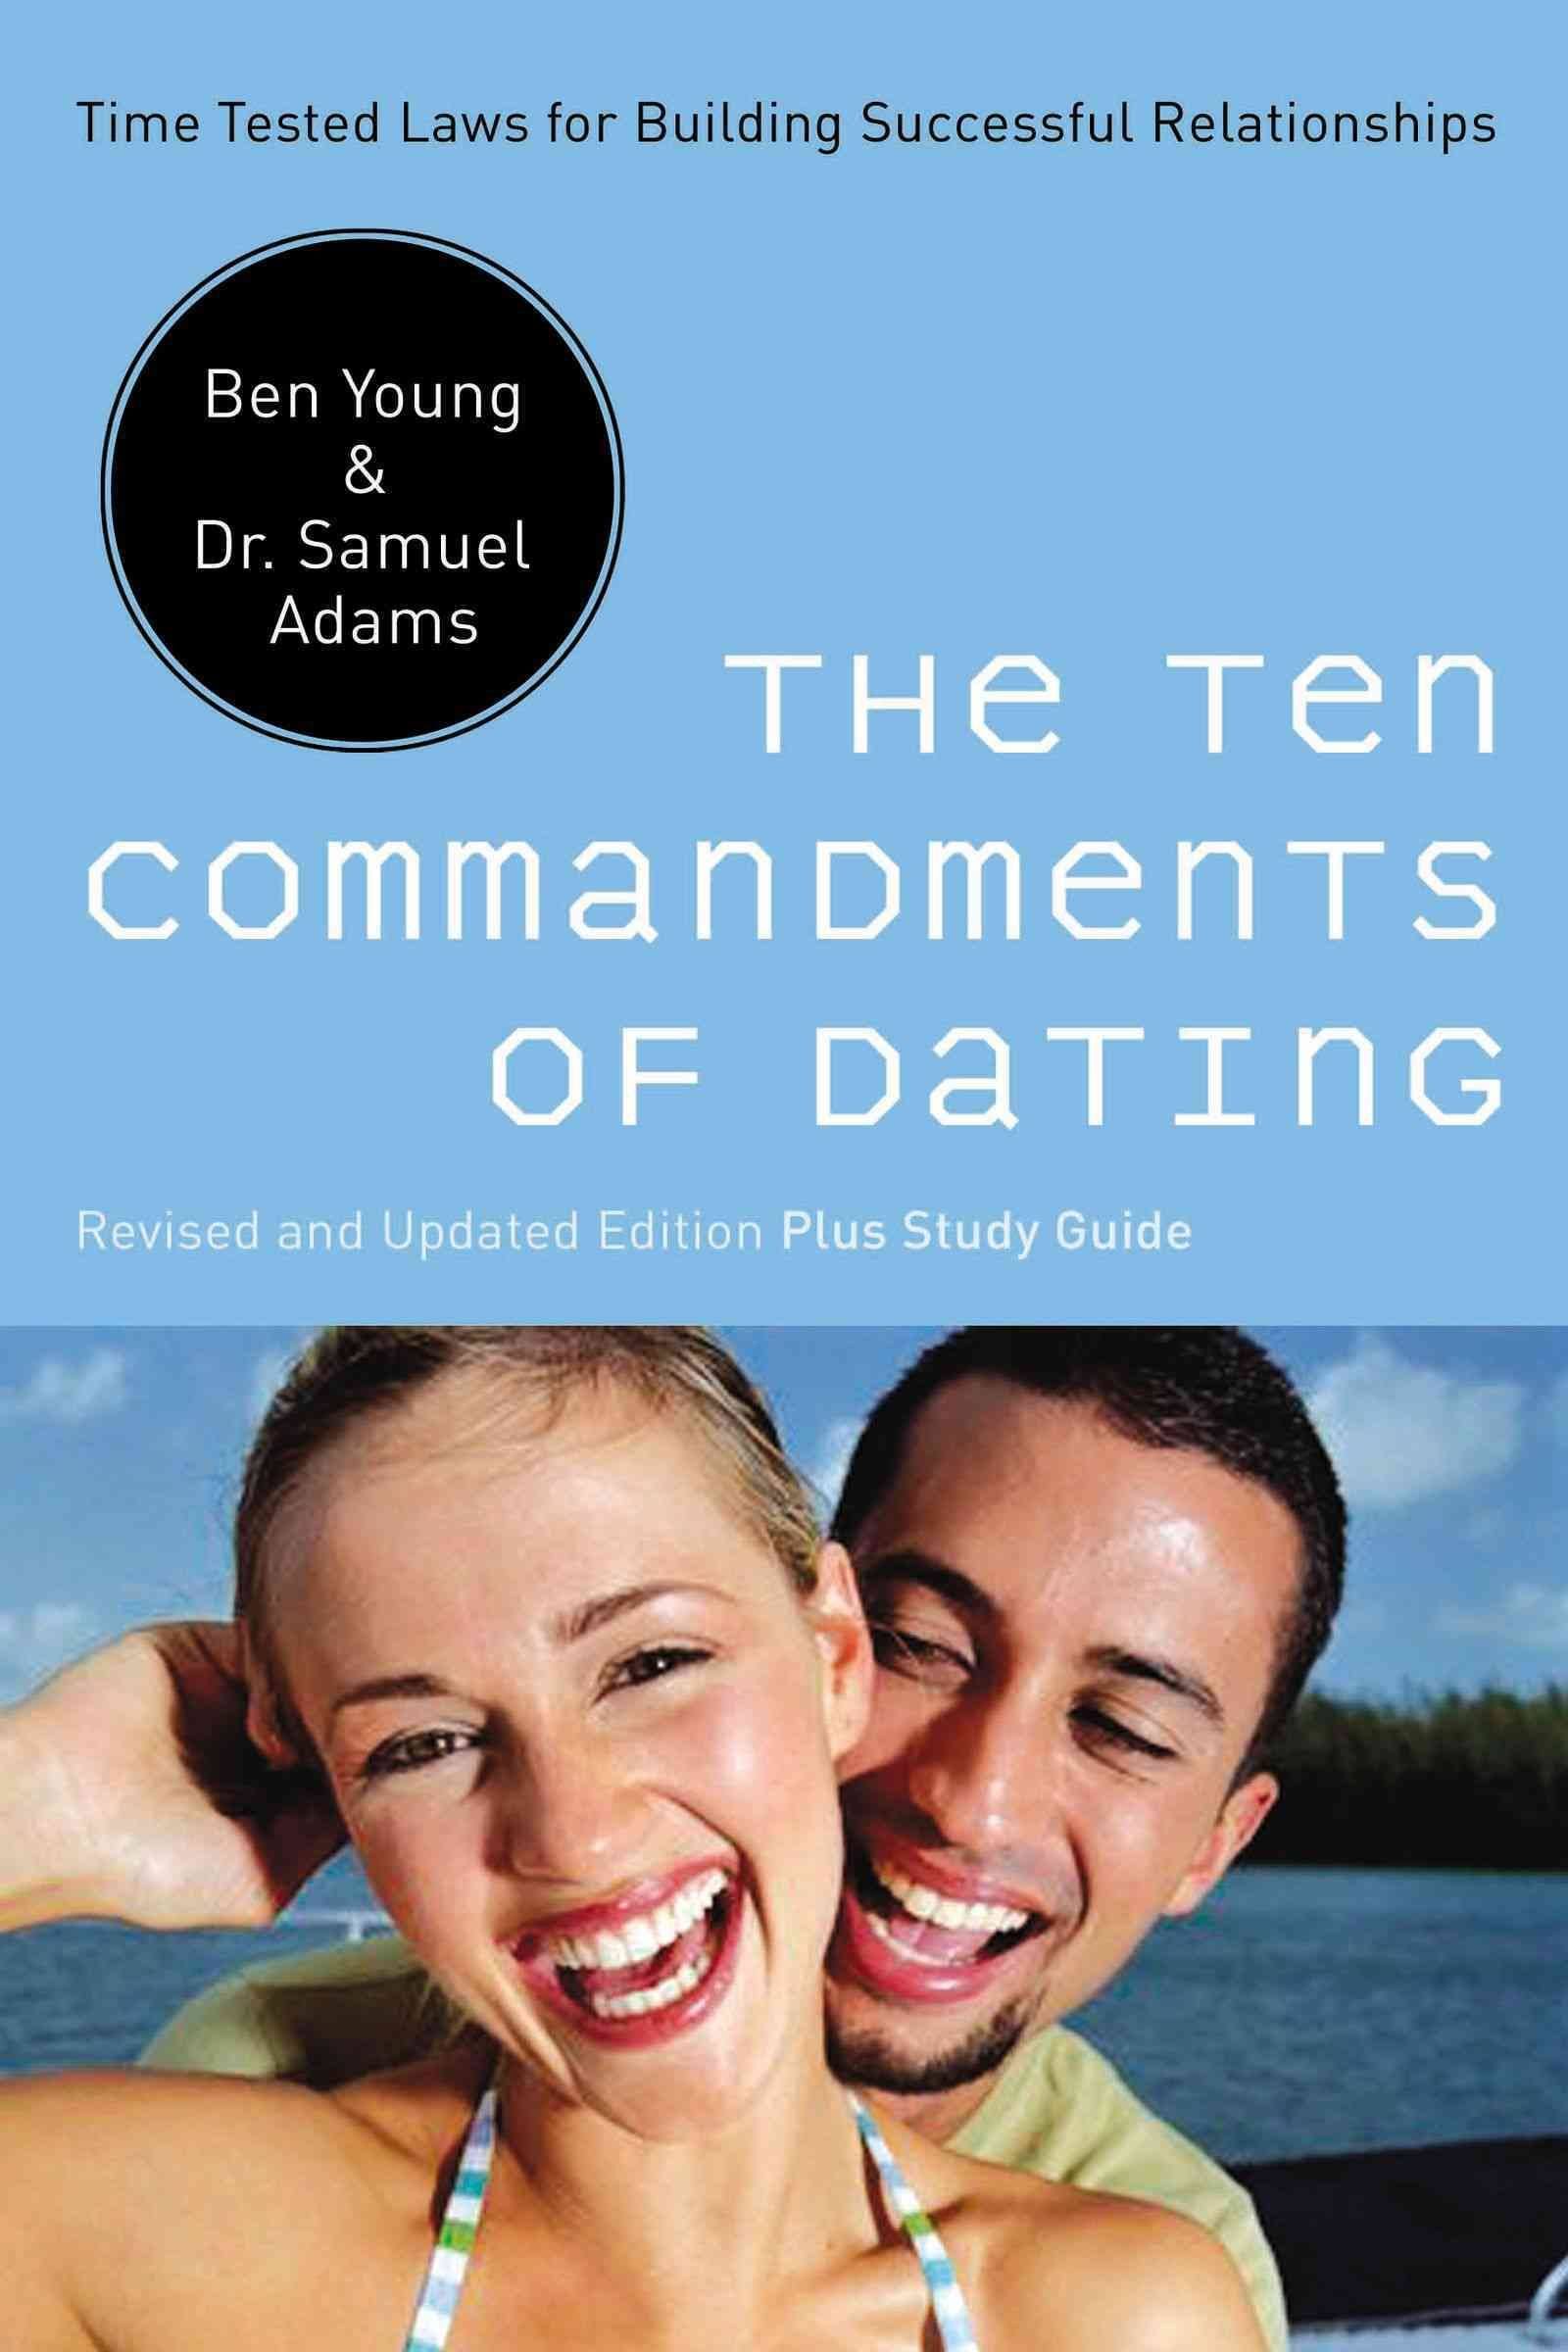 The Ten Commandments of Dating by Ben Young